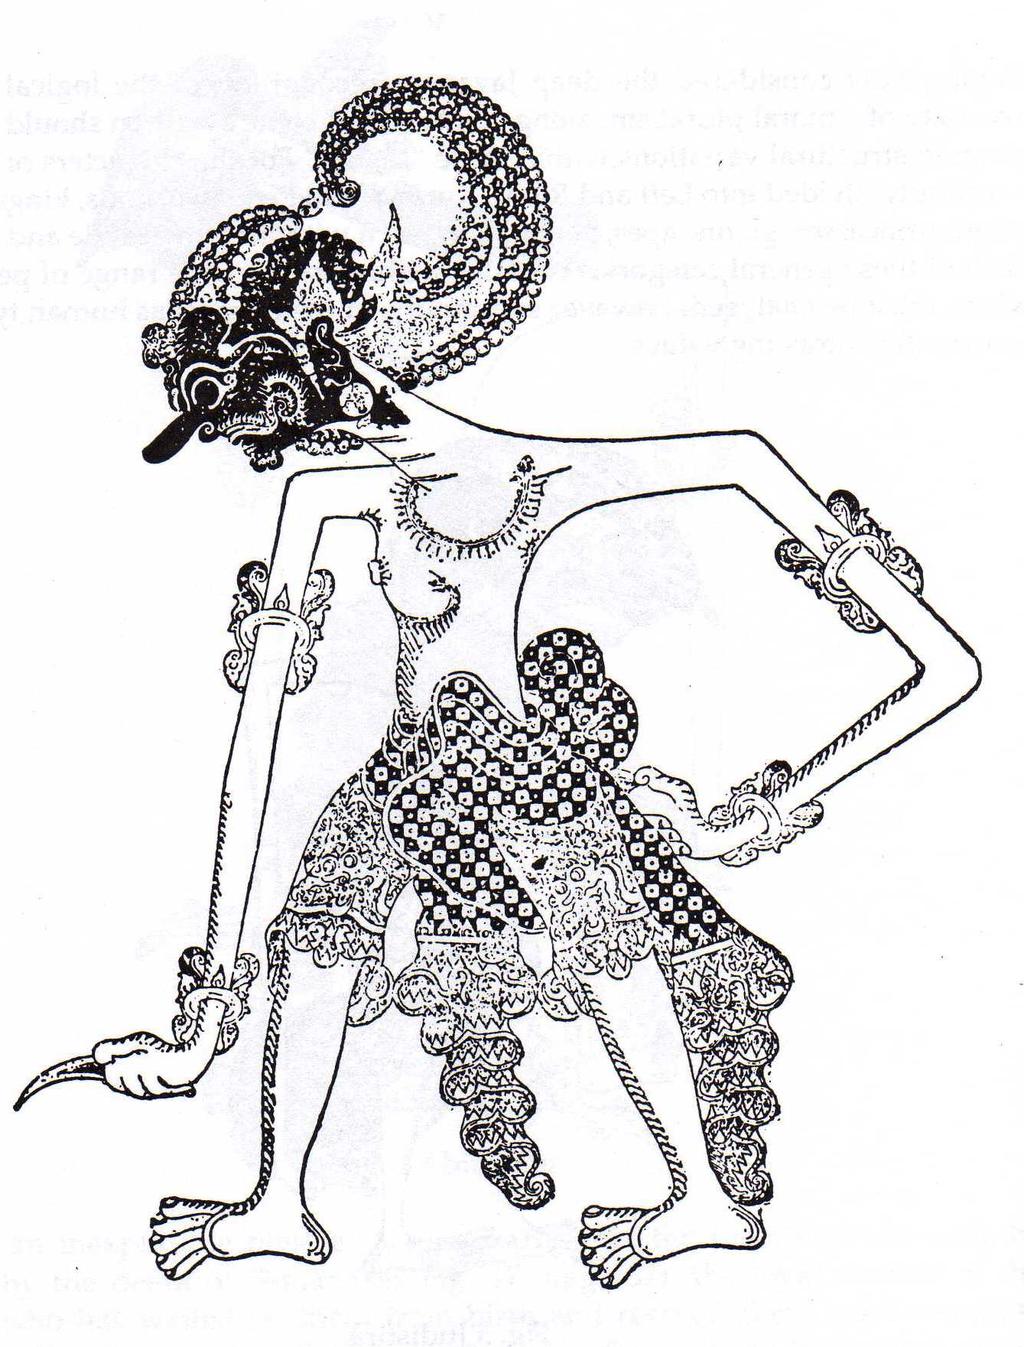 Examples of Wayang Characters Bimå (second Pandawa brother): is the most feared of warriors, creating havoc with his terrible club and atrocious fingernails.